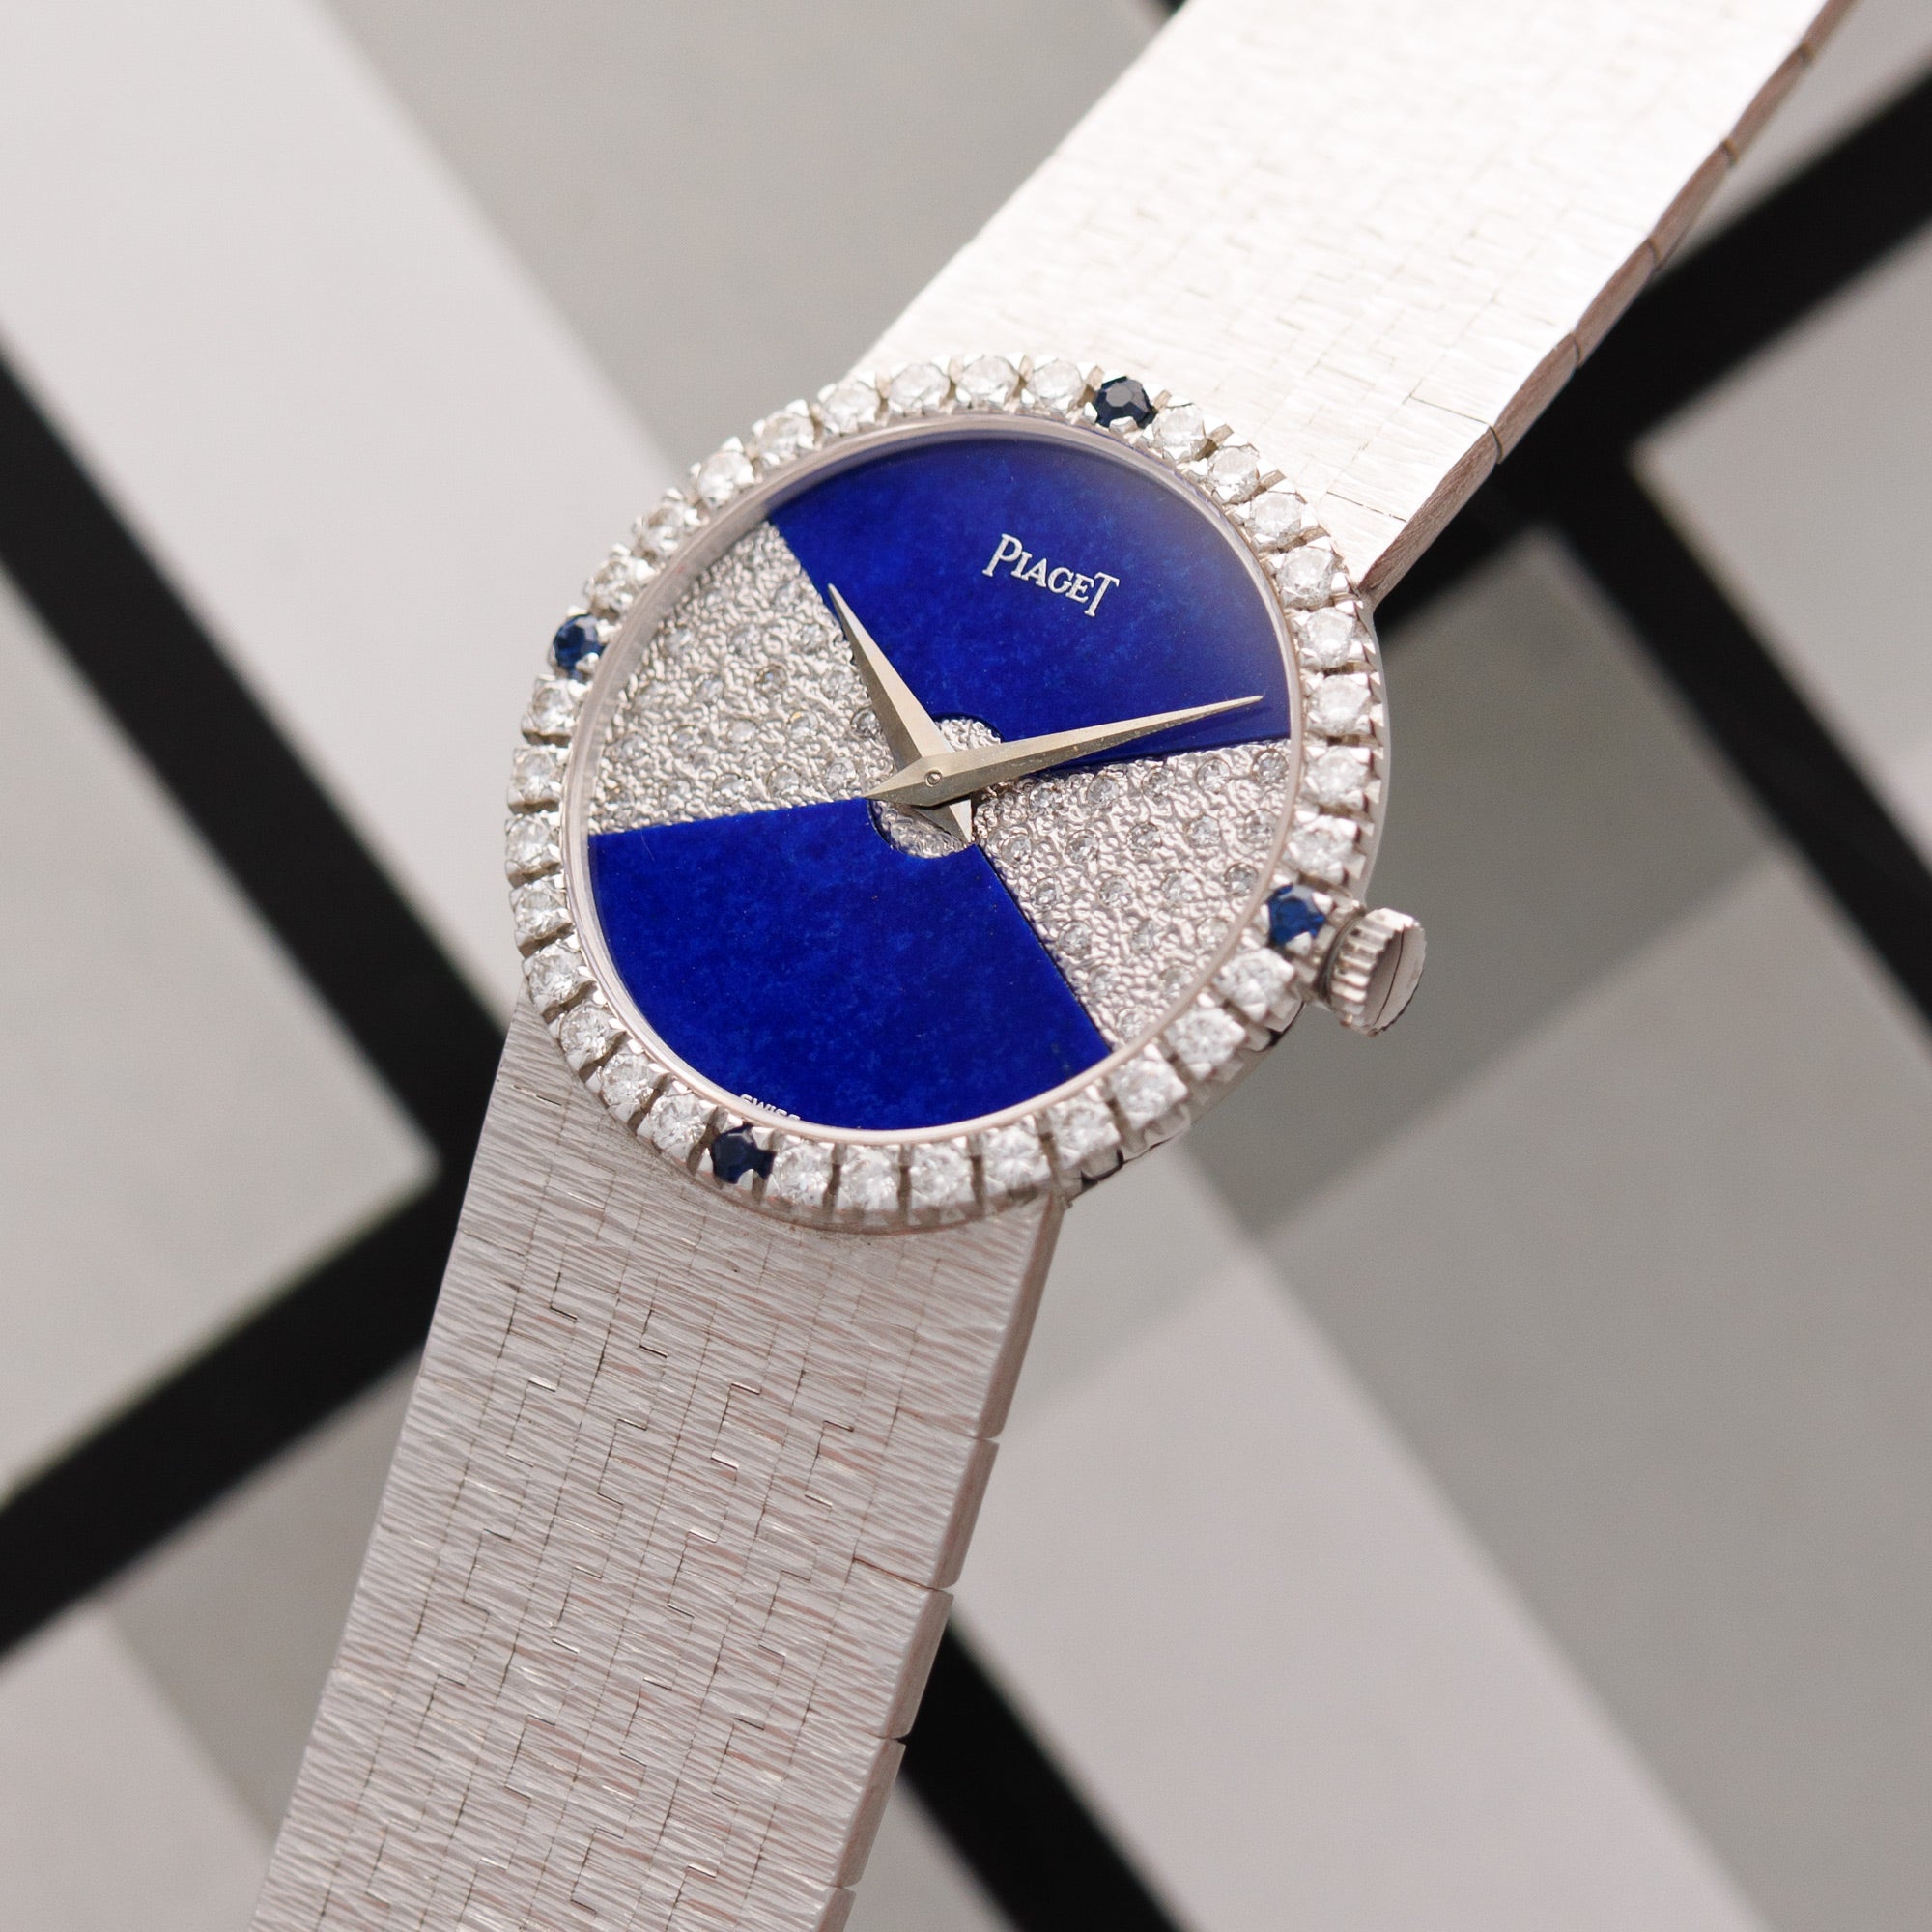 Piaget - Piaget White Gold, Lapis and Diamond Watch Ref. 9706 - The Keystone Watches